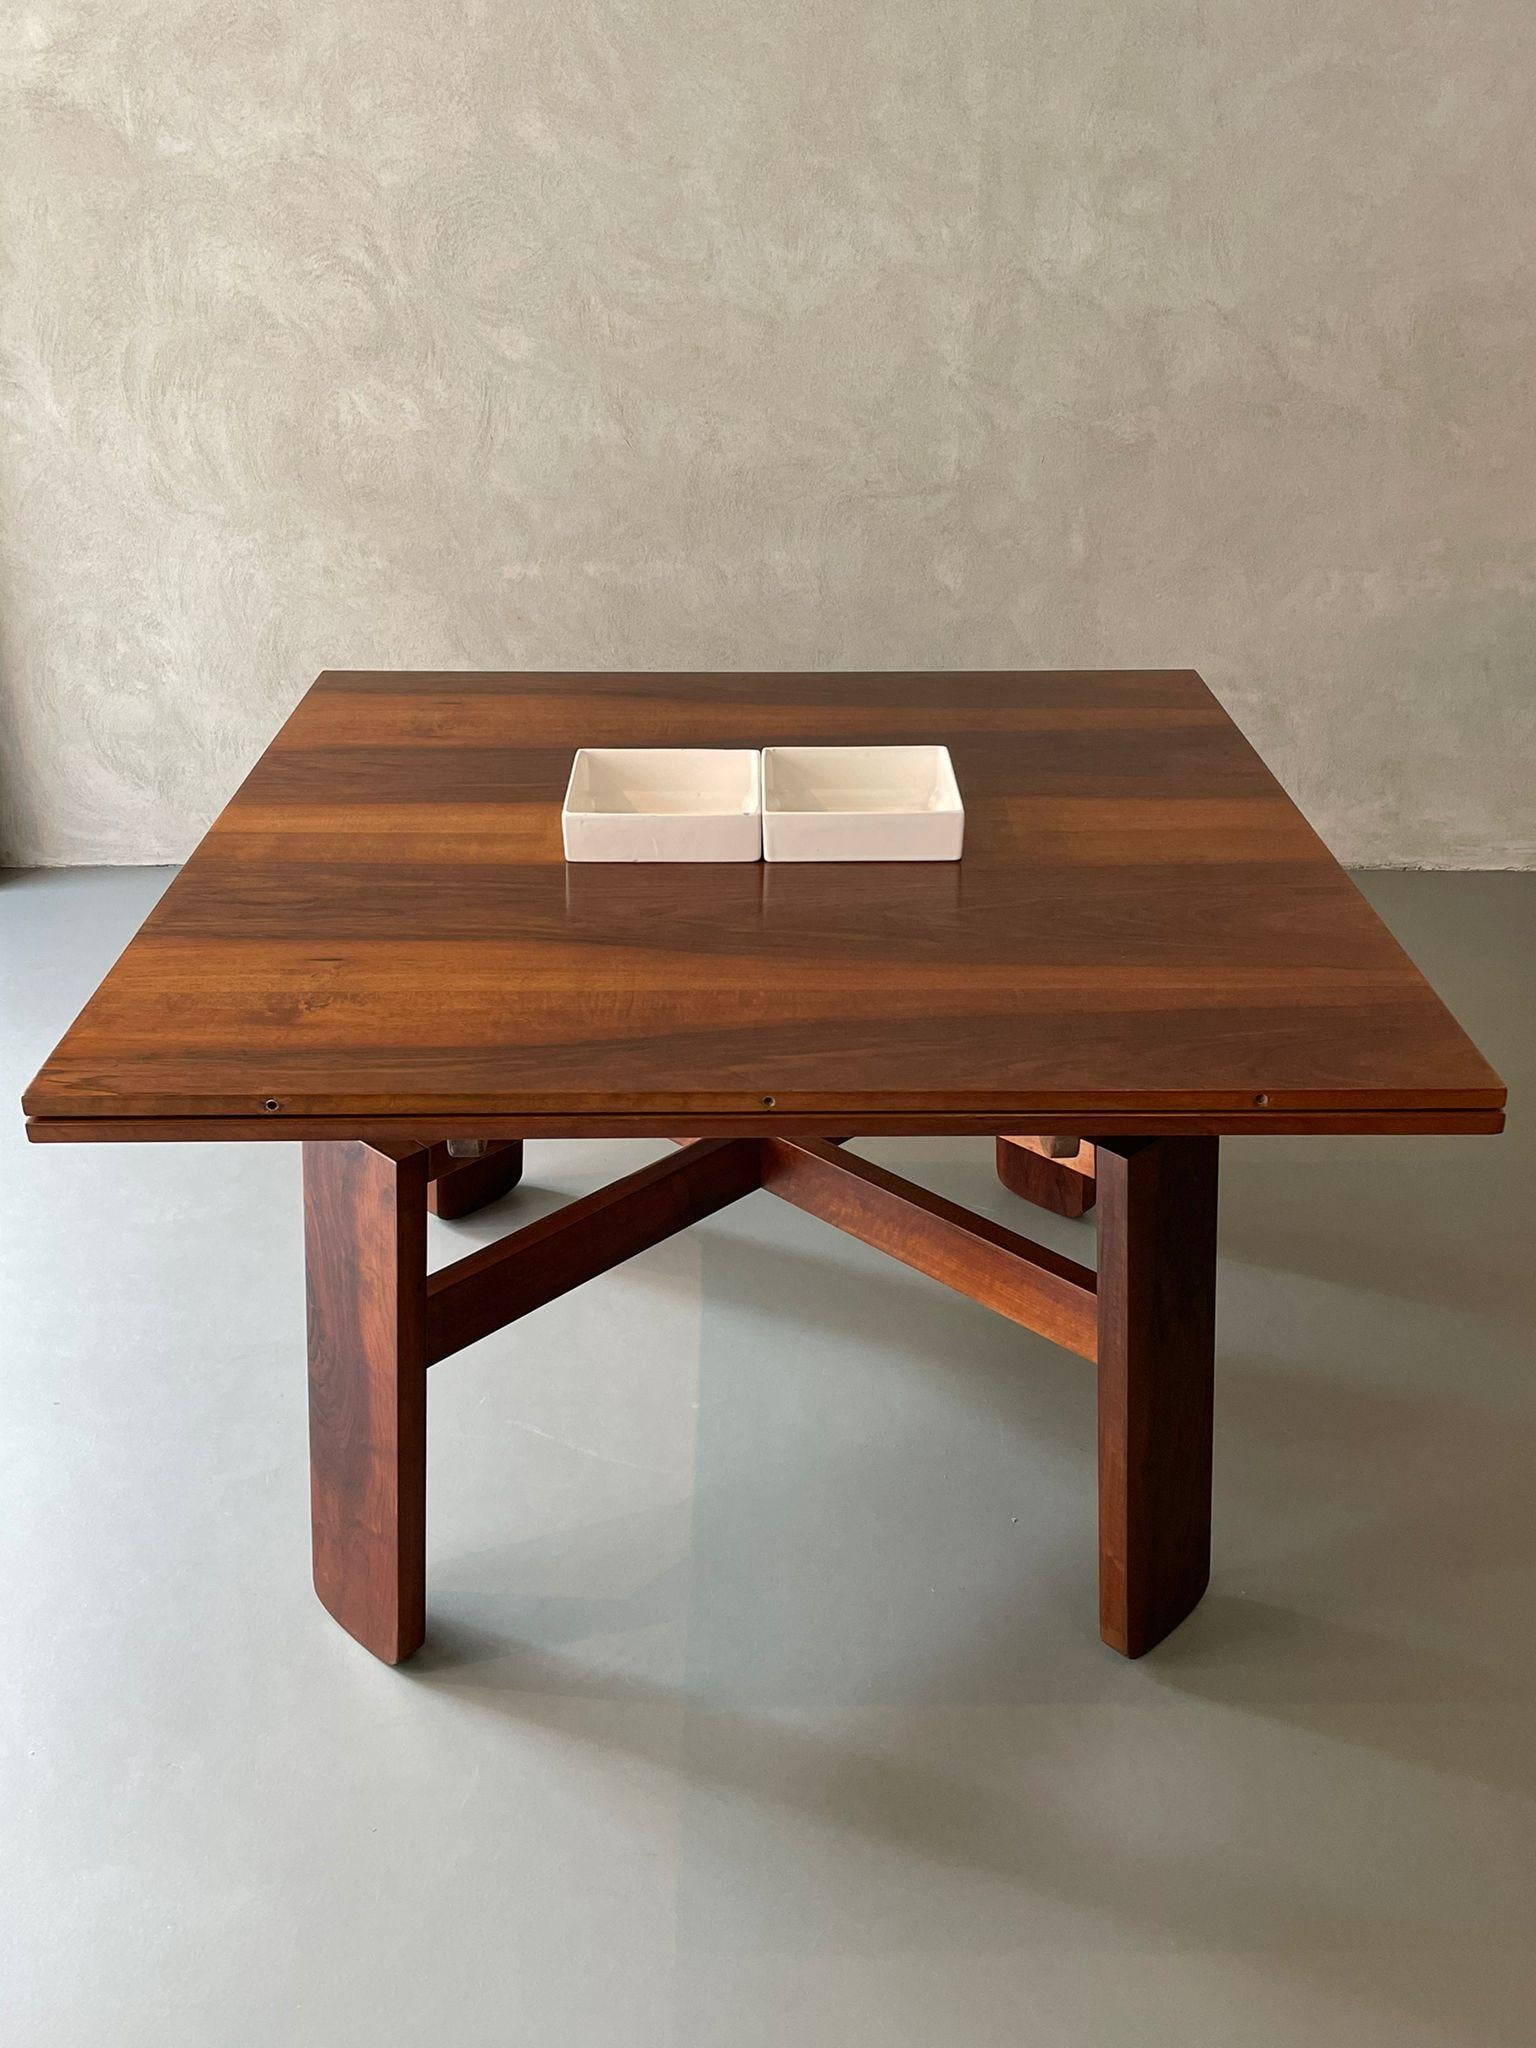 Square table designed by Silvio Coppola for Bernini, Italy, 1964.
The table is in walnut. The base has two wooden bars that cross each other. 
The table is extendable to take a rectangular shape:

Measures: 28.7 x 82.6 x 45.2 in
73 x 210 x 115